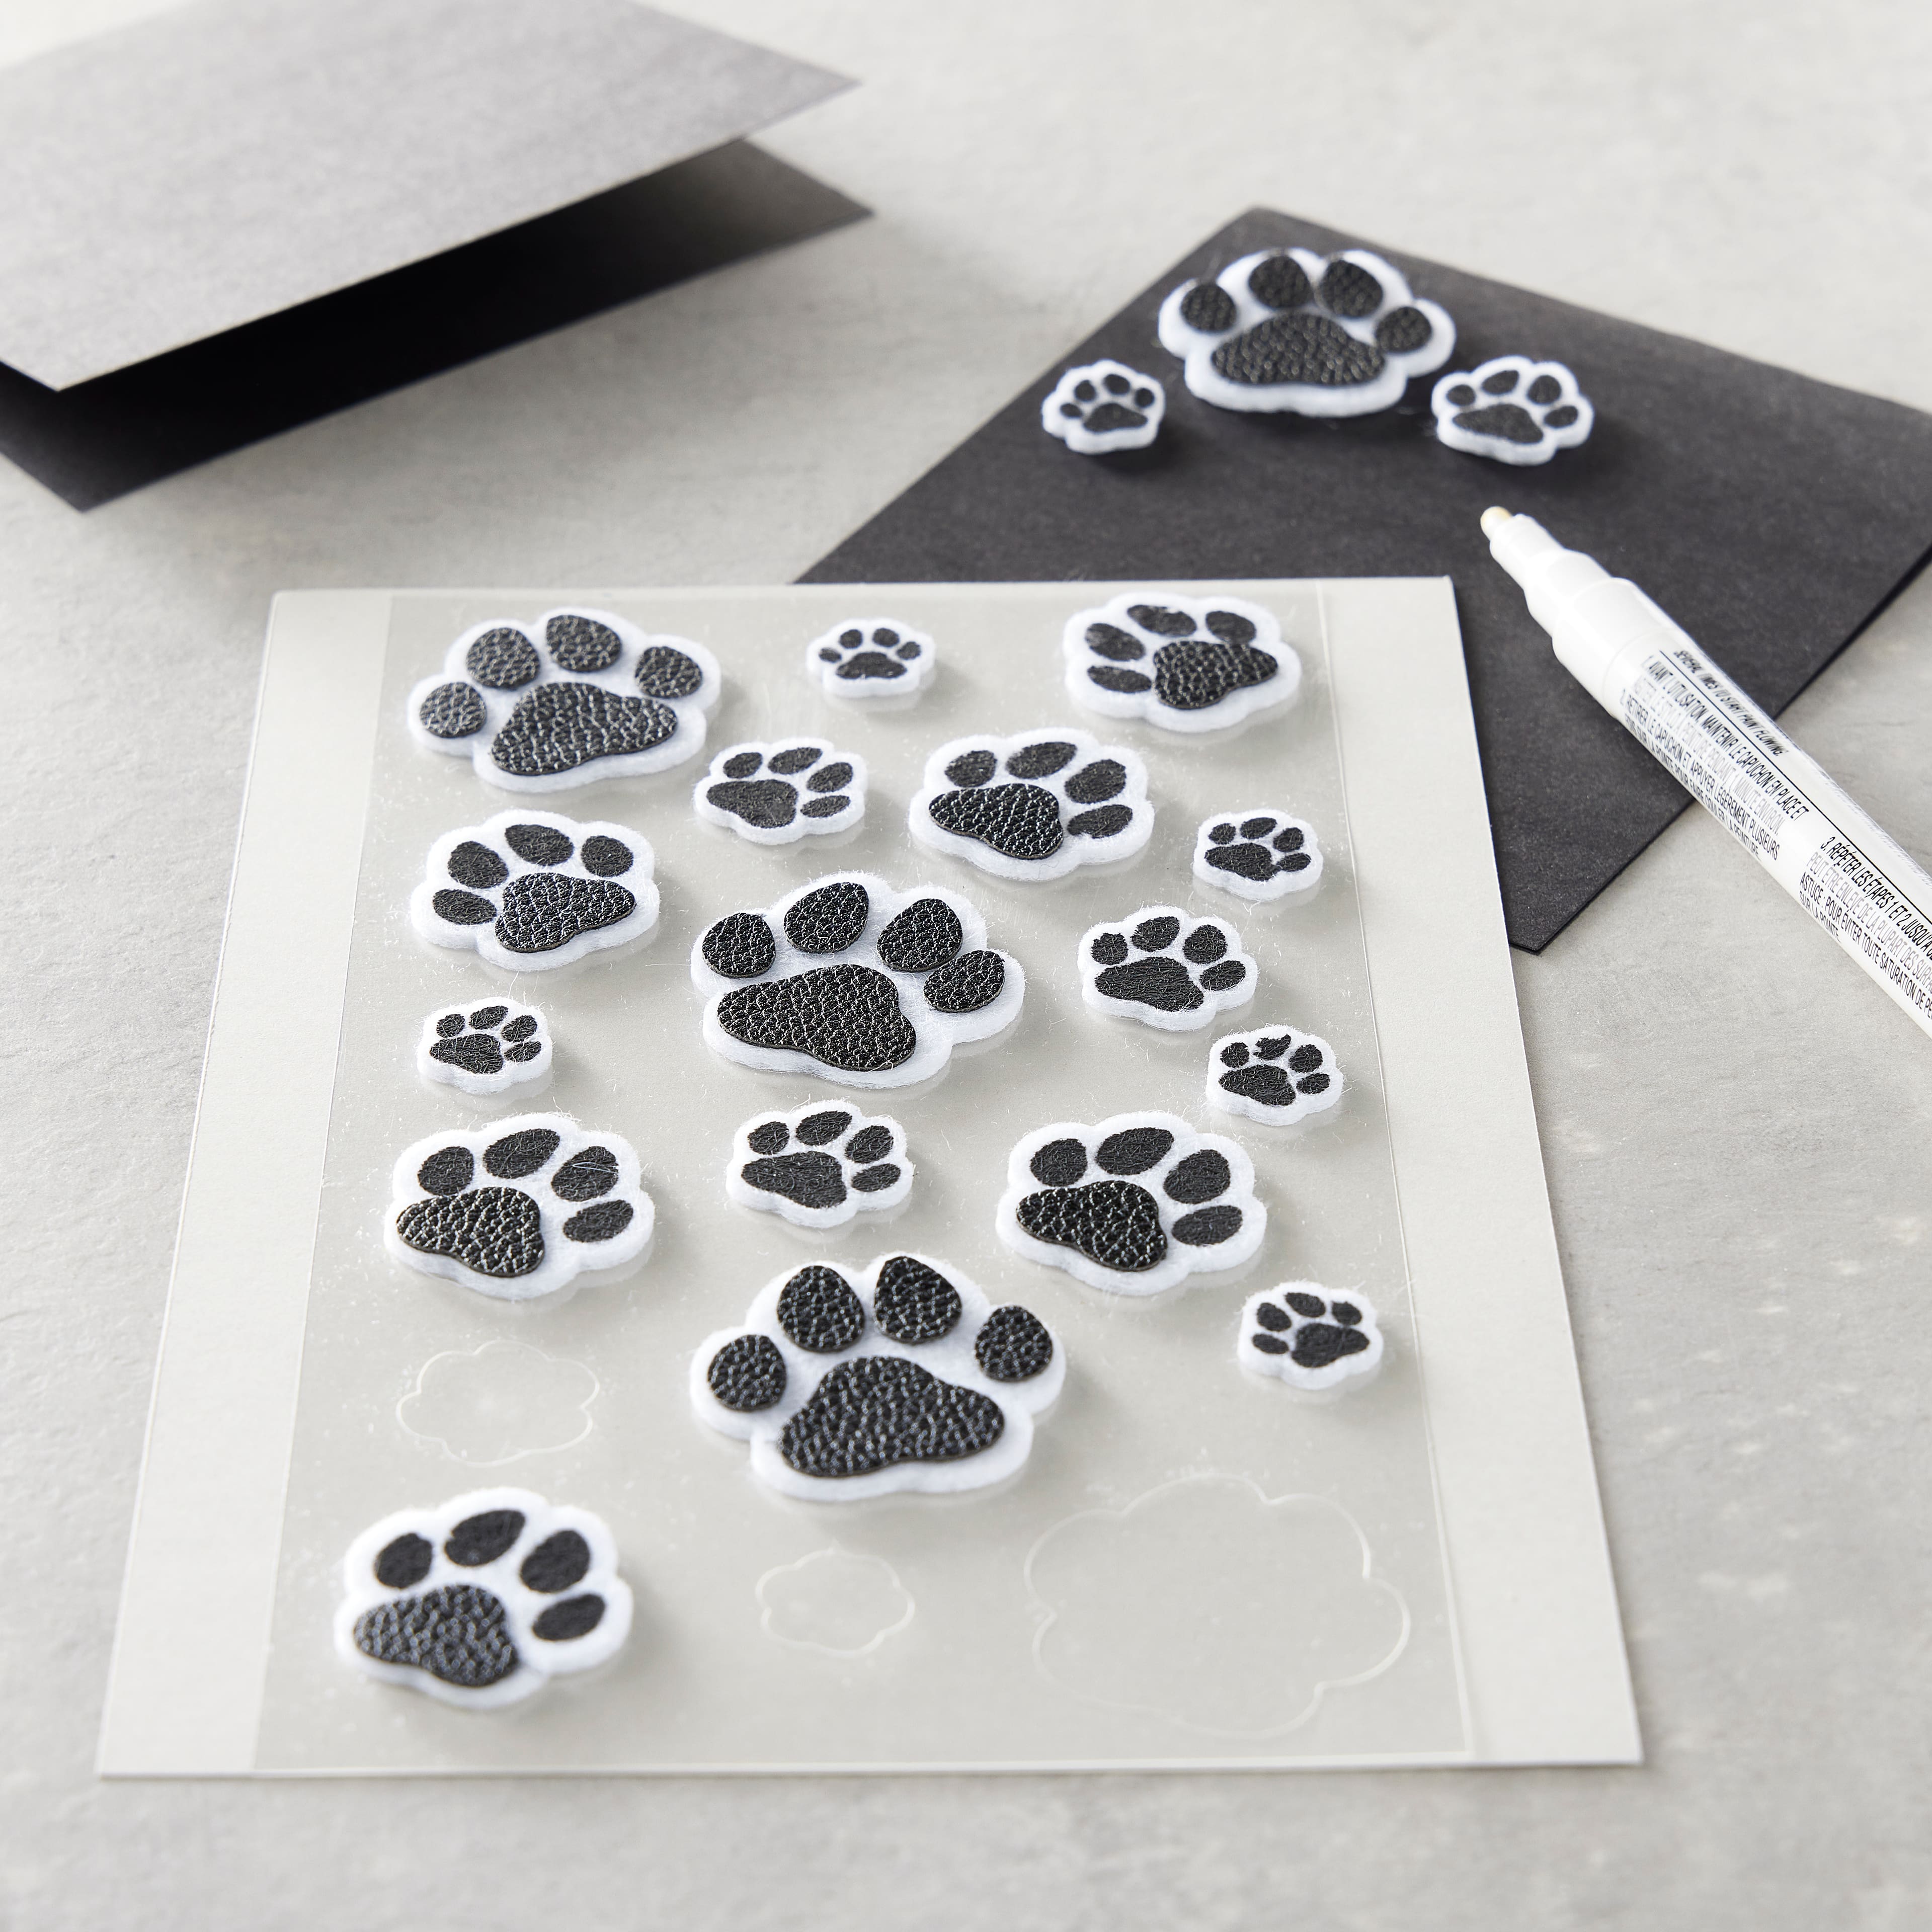 Dog Paw Print - Vinyl Decal Sticker - Multiple Color & Sizes - ebn212